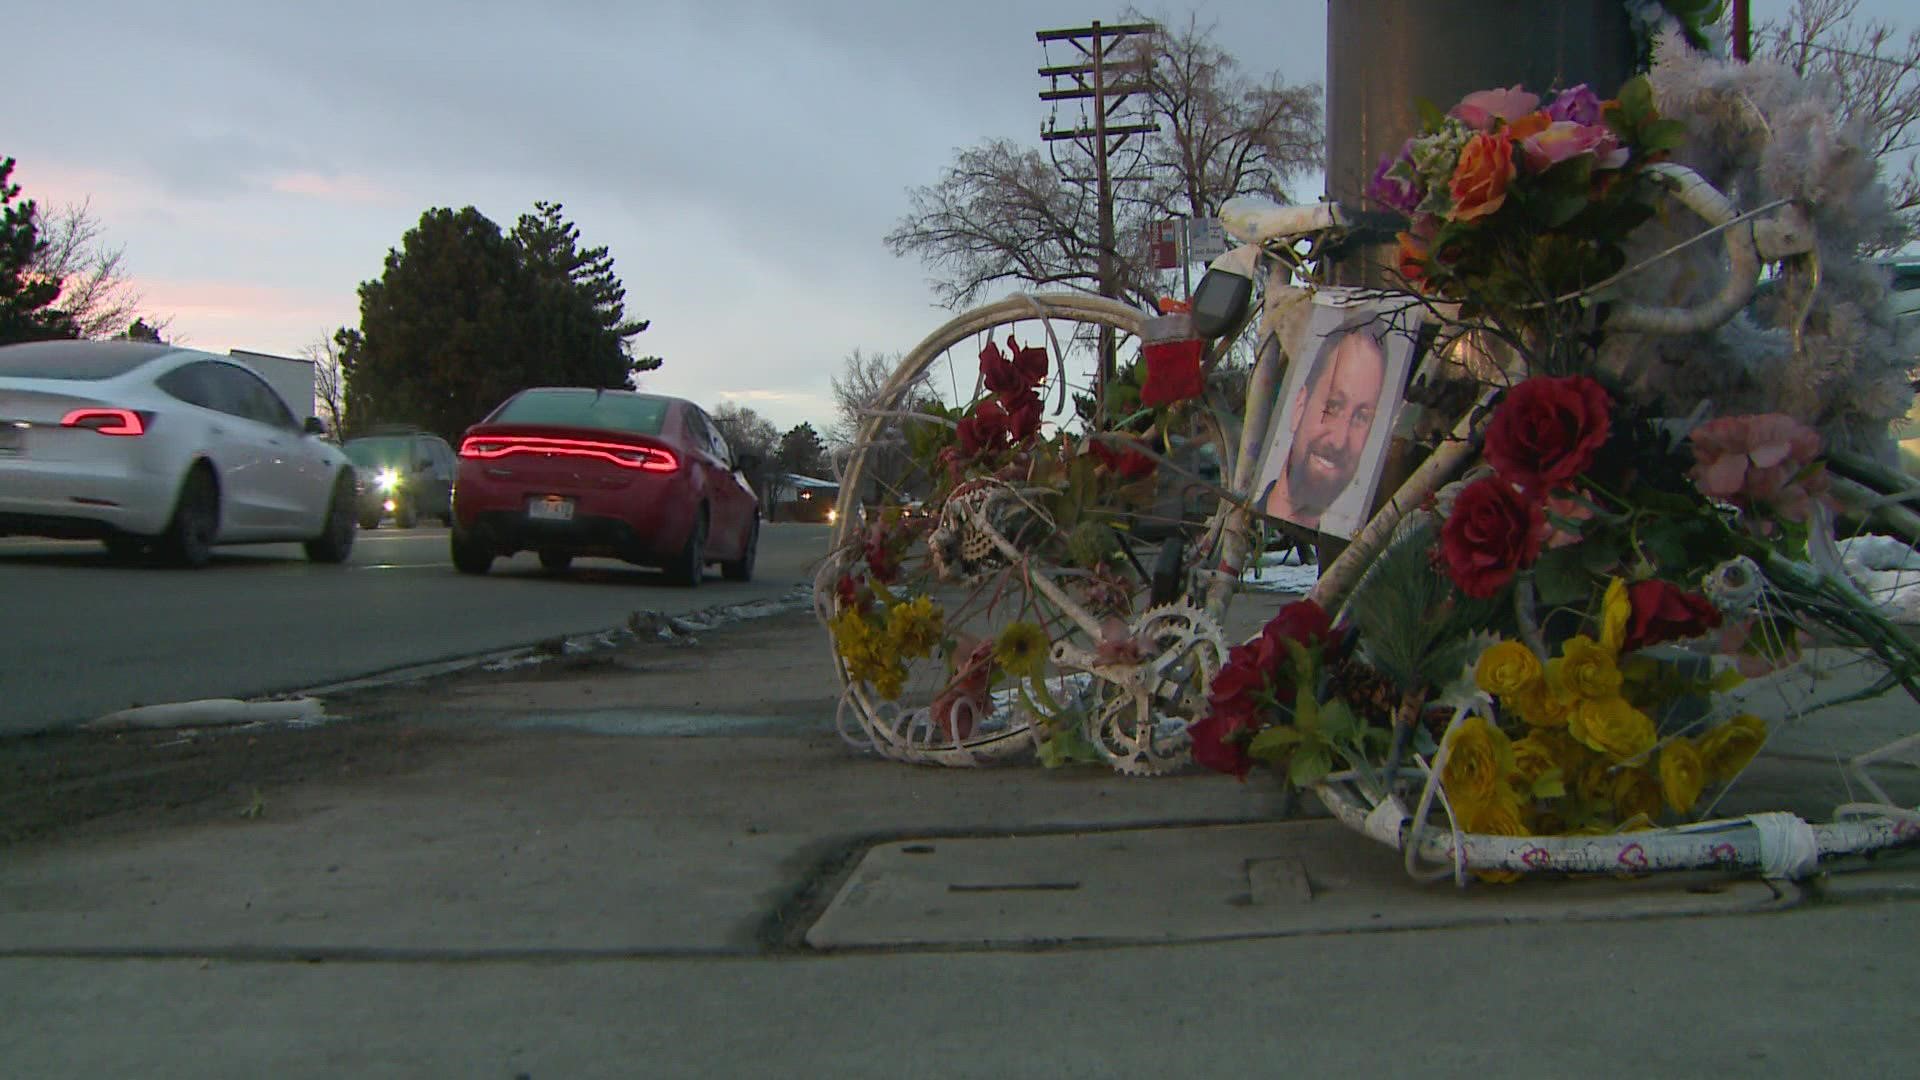 Family and friends said "ghost bikes" have been hit and damaged by cars at the very same spots they lost their loved ones.